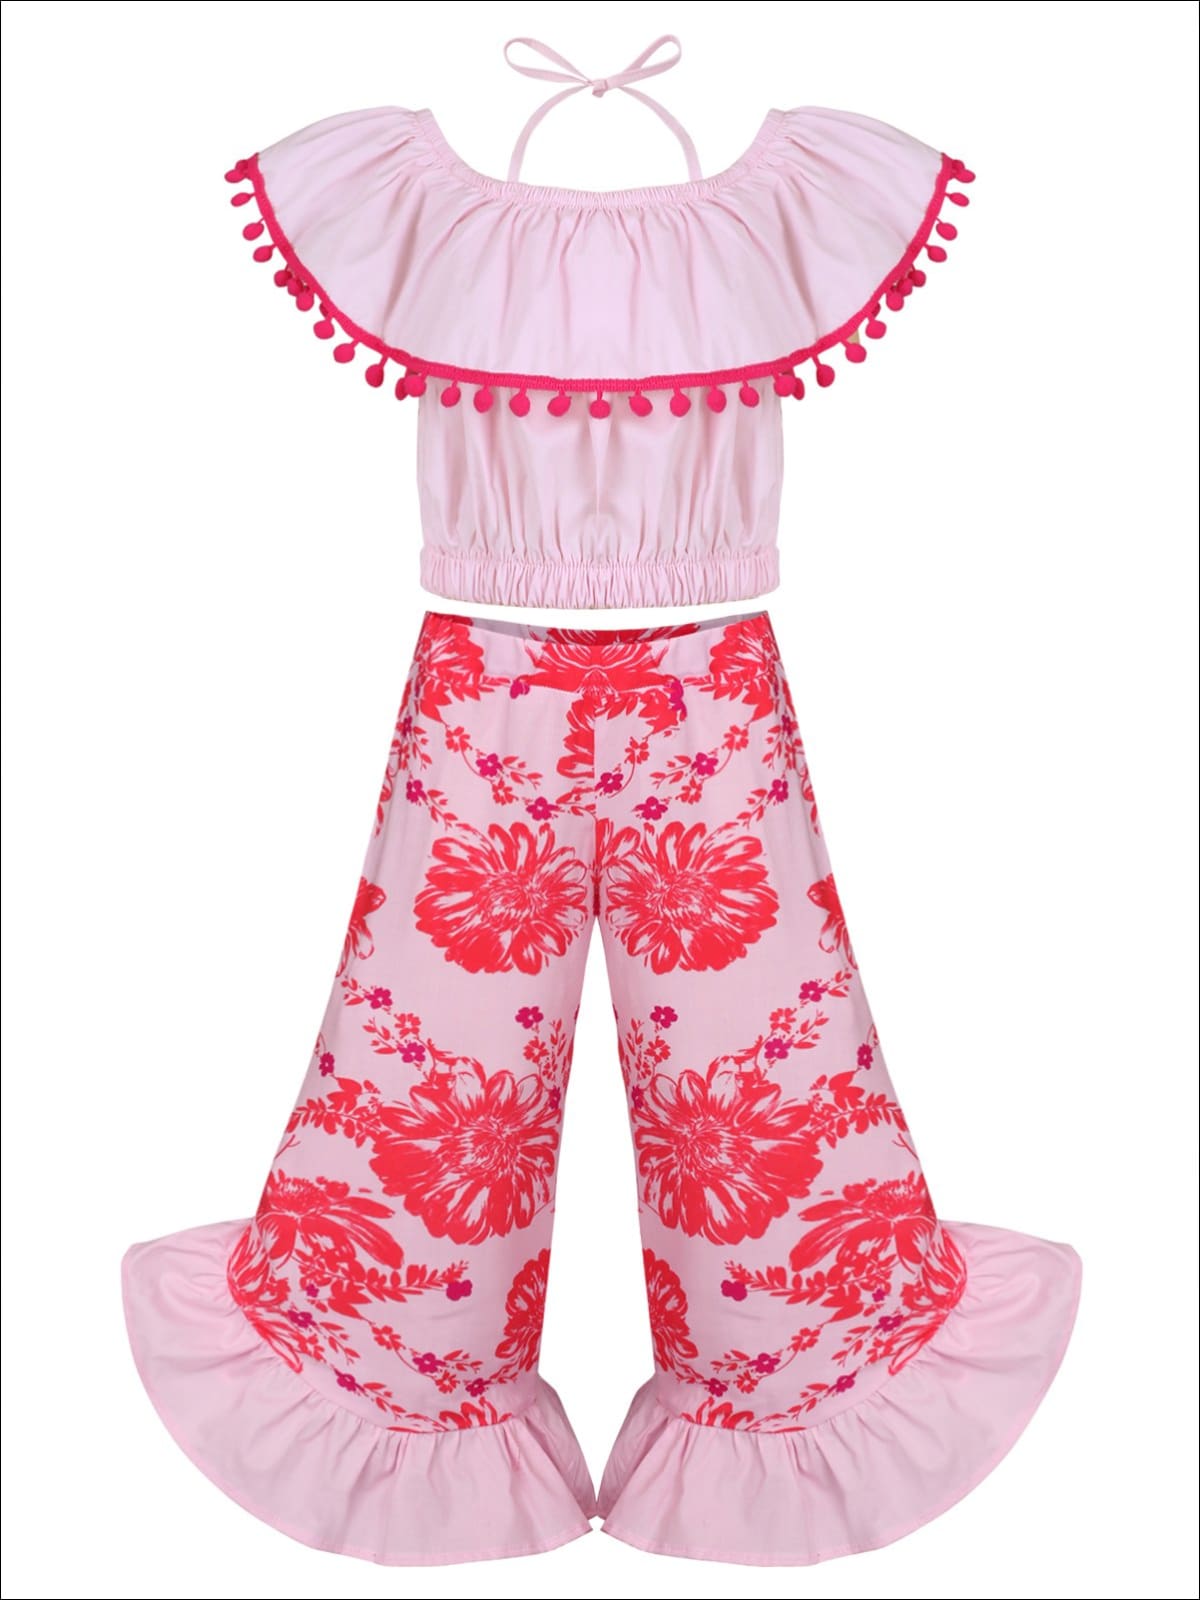 Girls Off the Shoulder Trimmed Ruffle Halter Neck Top & Floral Ruffled Palazzo Pants Set - Pink / 2T/3T - Girls Spring Casual Set